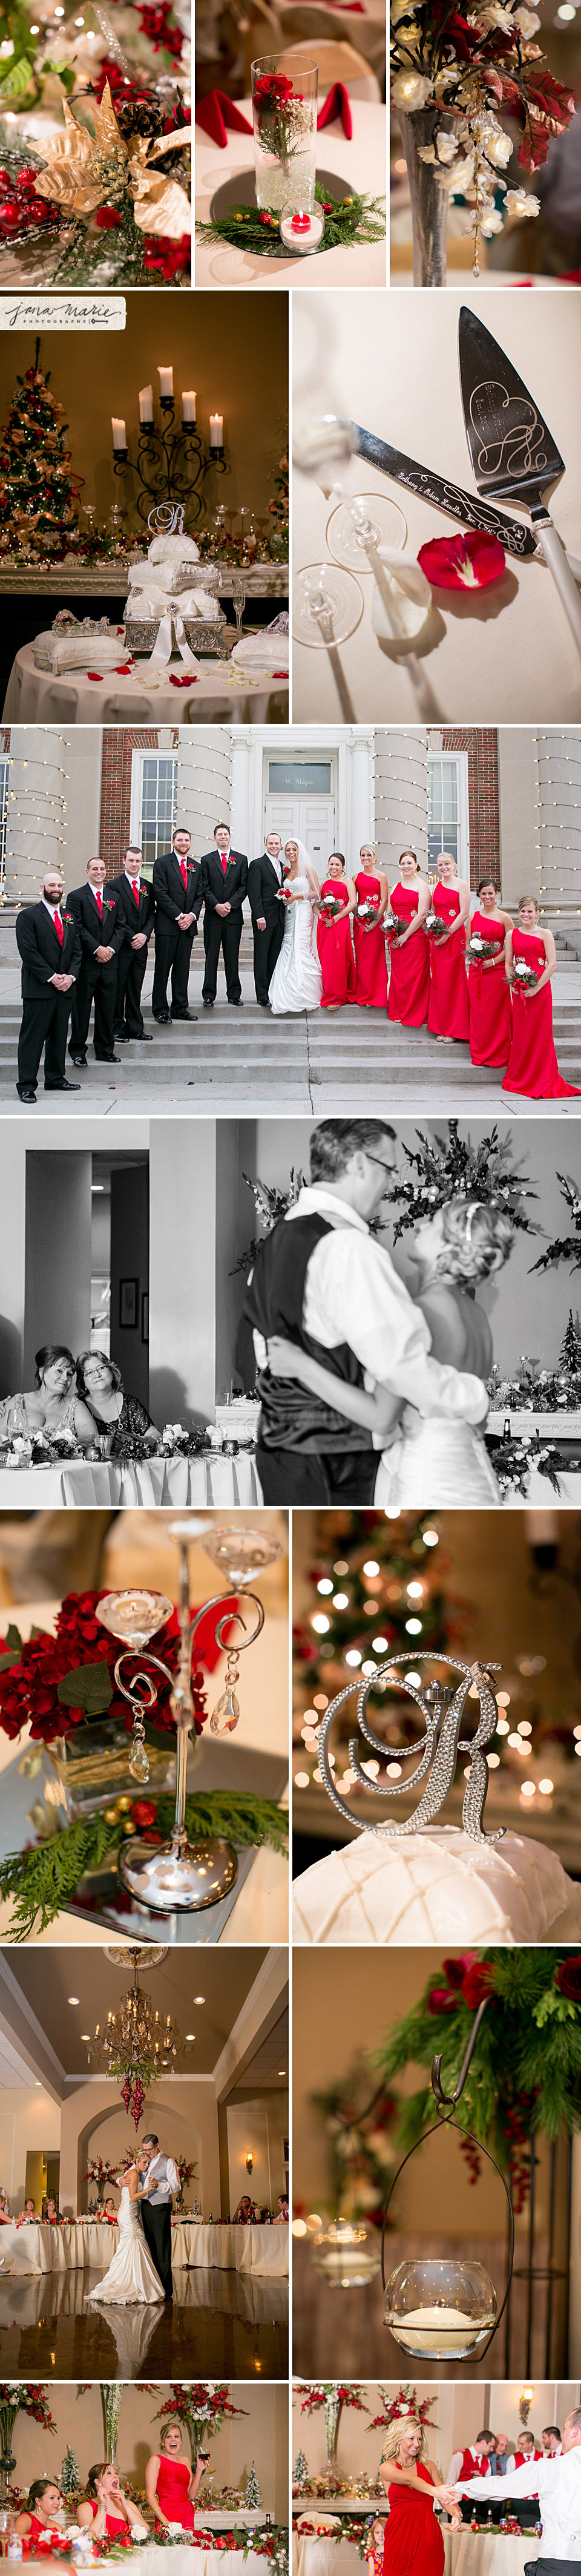 Midwest wedding photographer, Featured images, father daughter dance, bridal party, Jana Marler